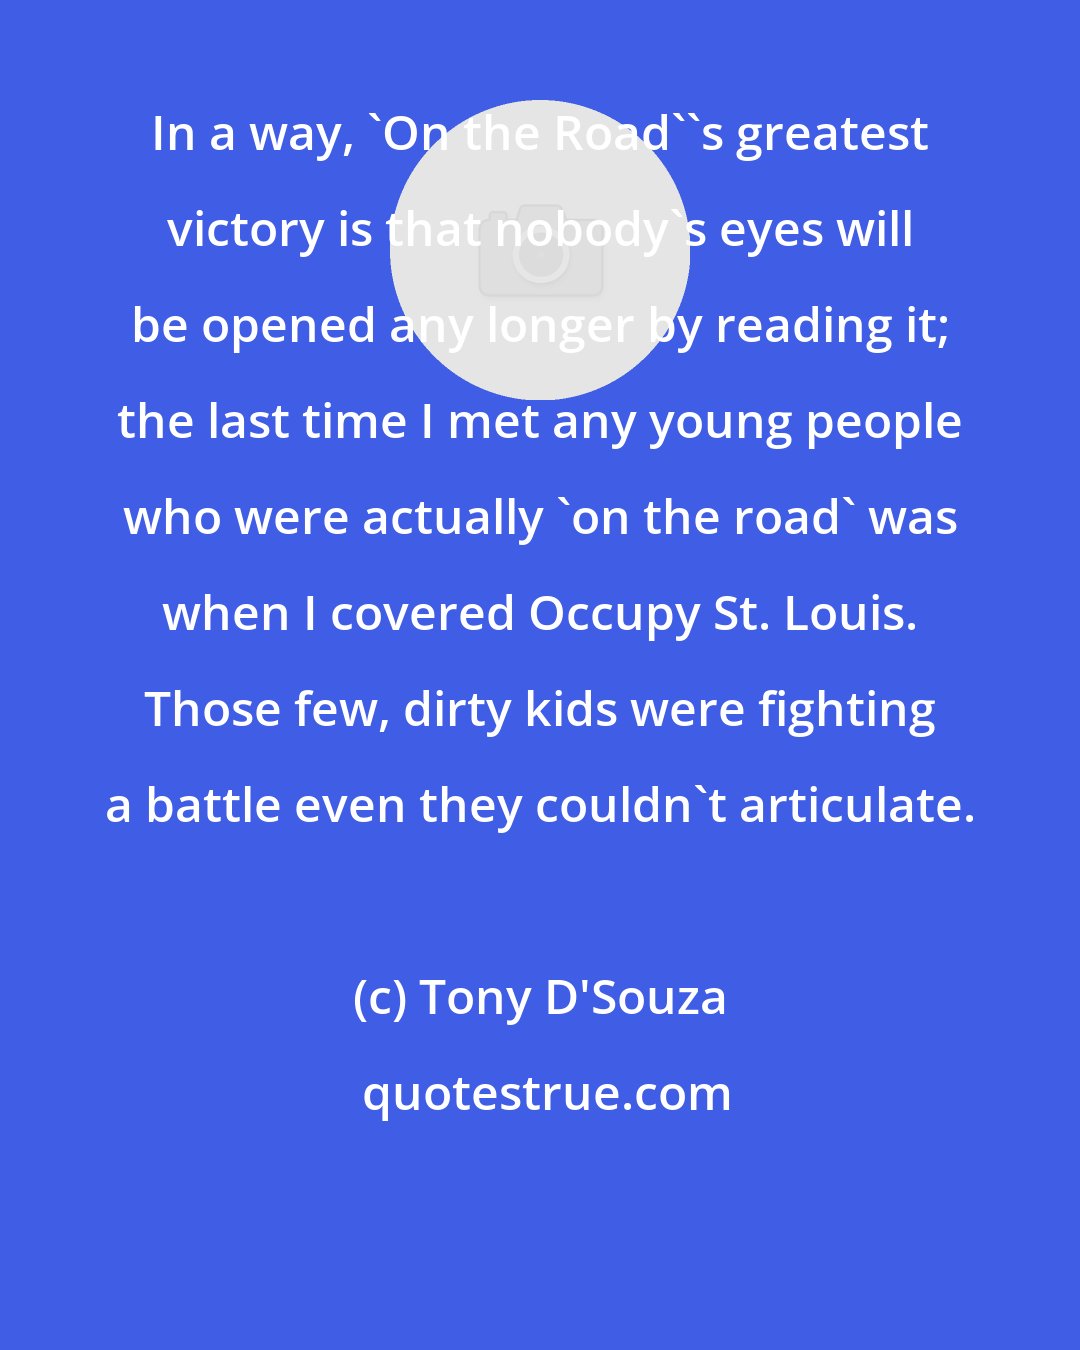 Tony D'Souza: In a way, 'On the Road''s greatest victory is that nobody's eyes will be opened any longer by reading it; the last time I met any young people who were actually 'on the road' was when I covered Occupy St. Louis. Those few, dirty kids were fighting a battle even they couldn't articulate.